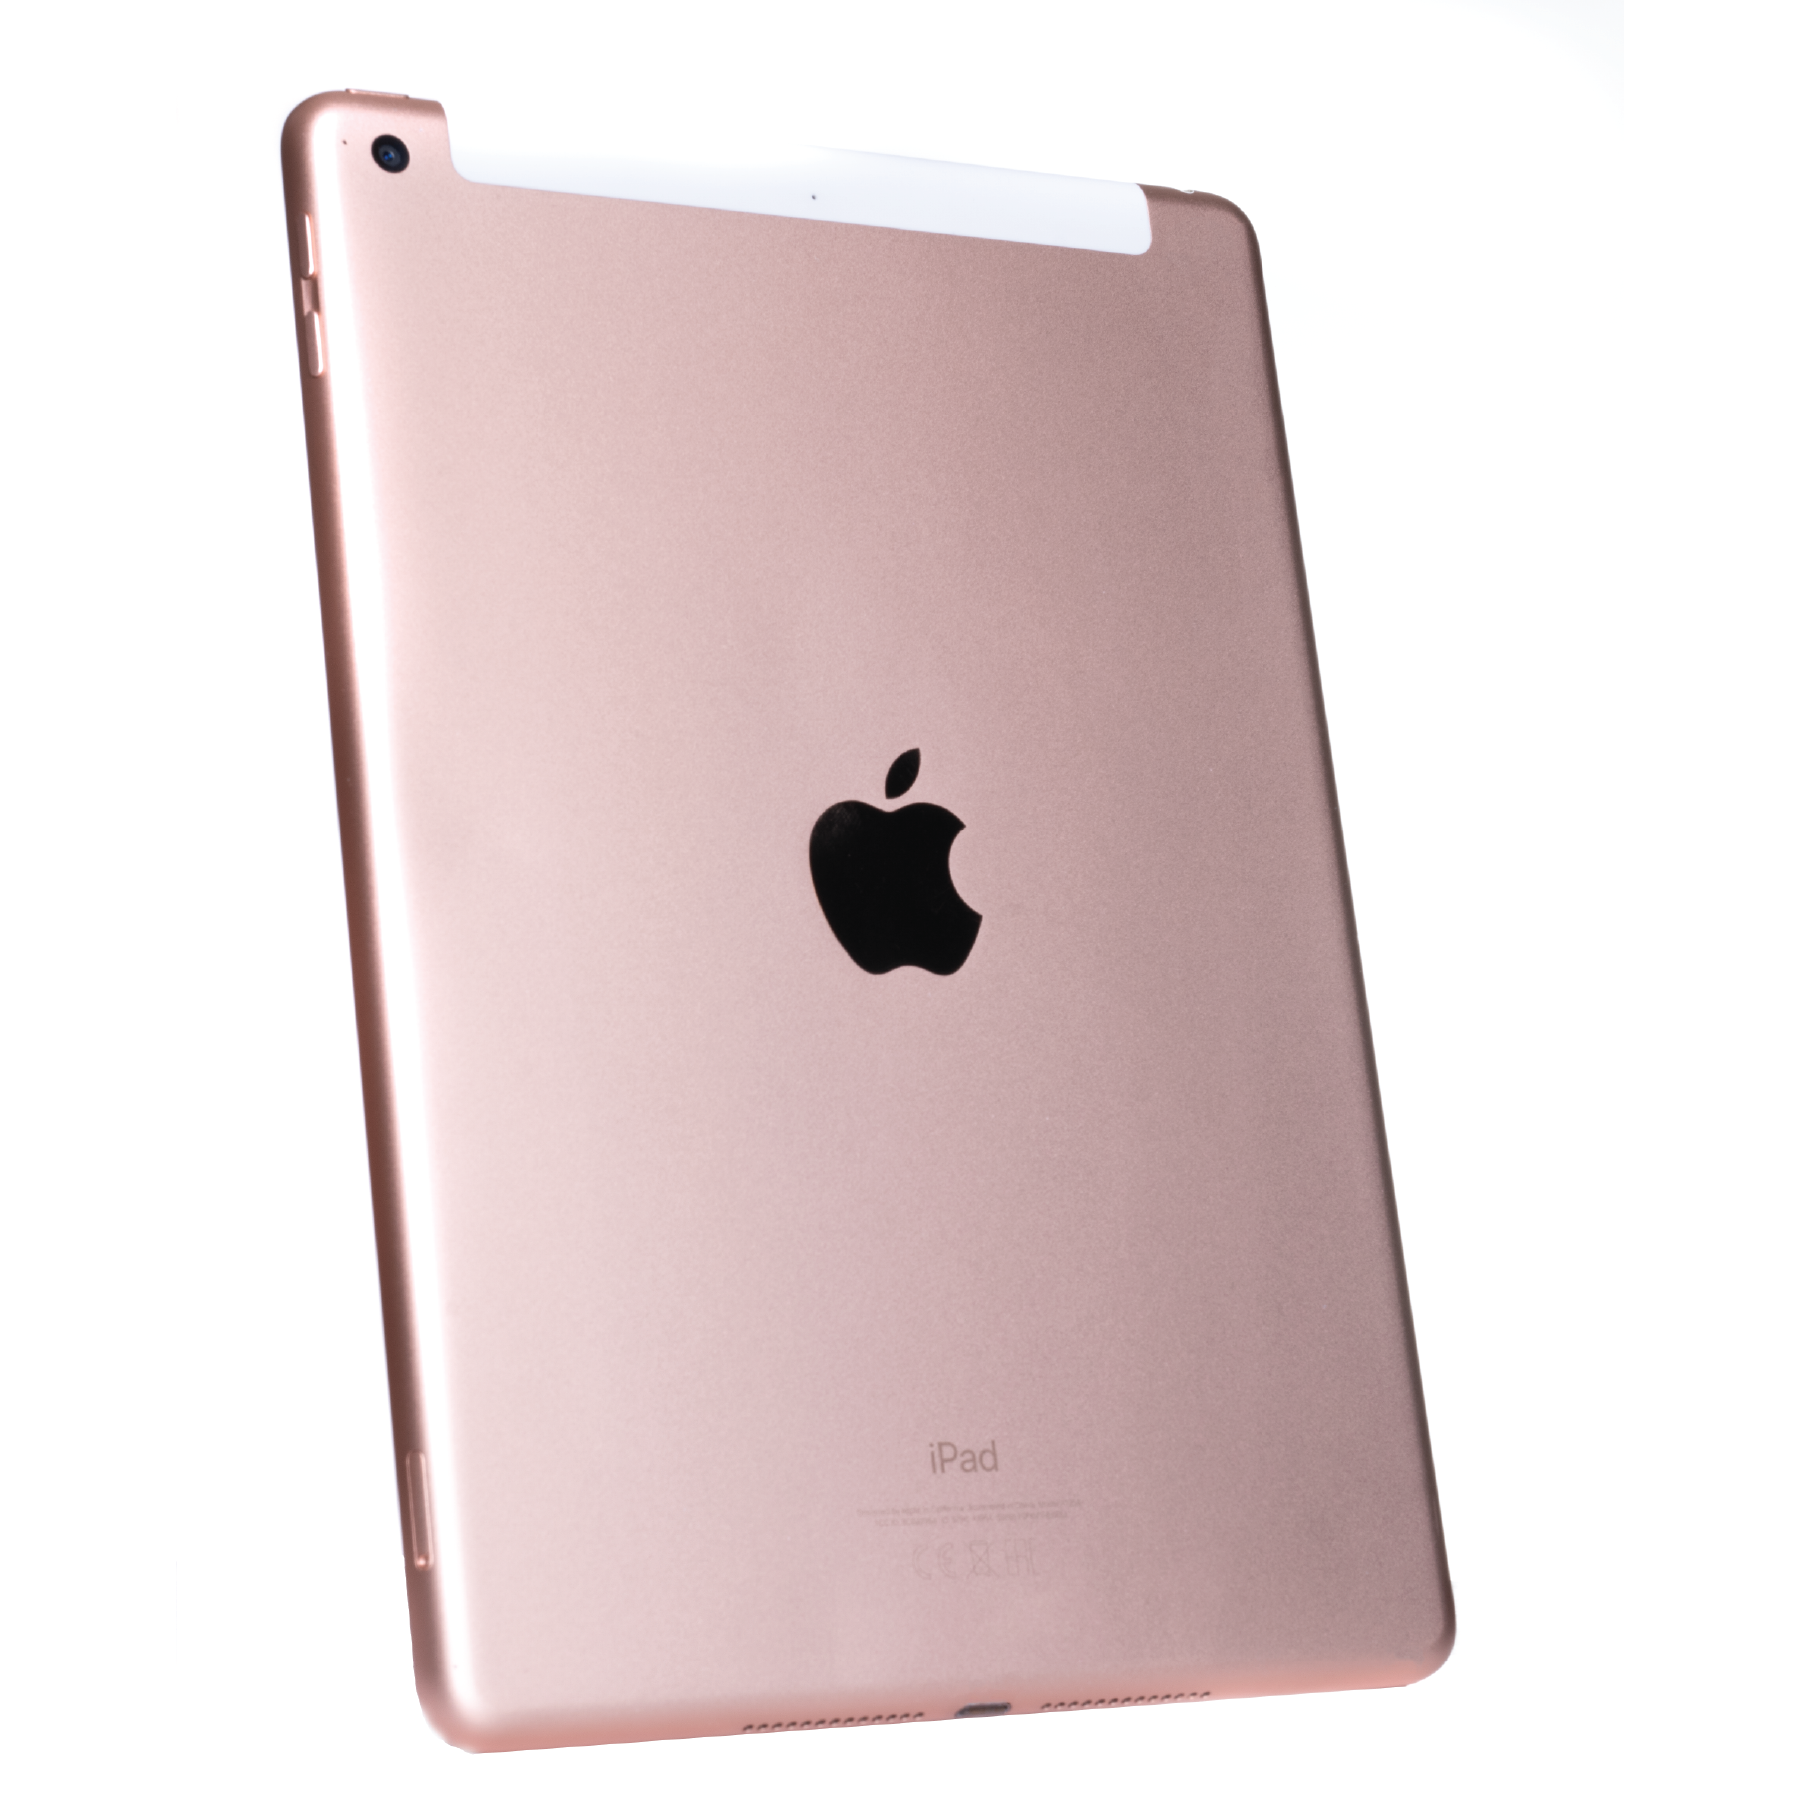 'Best' Condition iPad - iStore Pre-owned